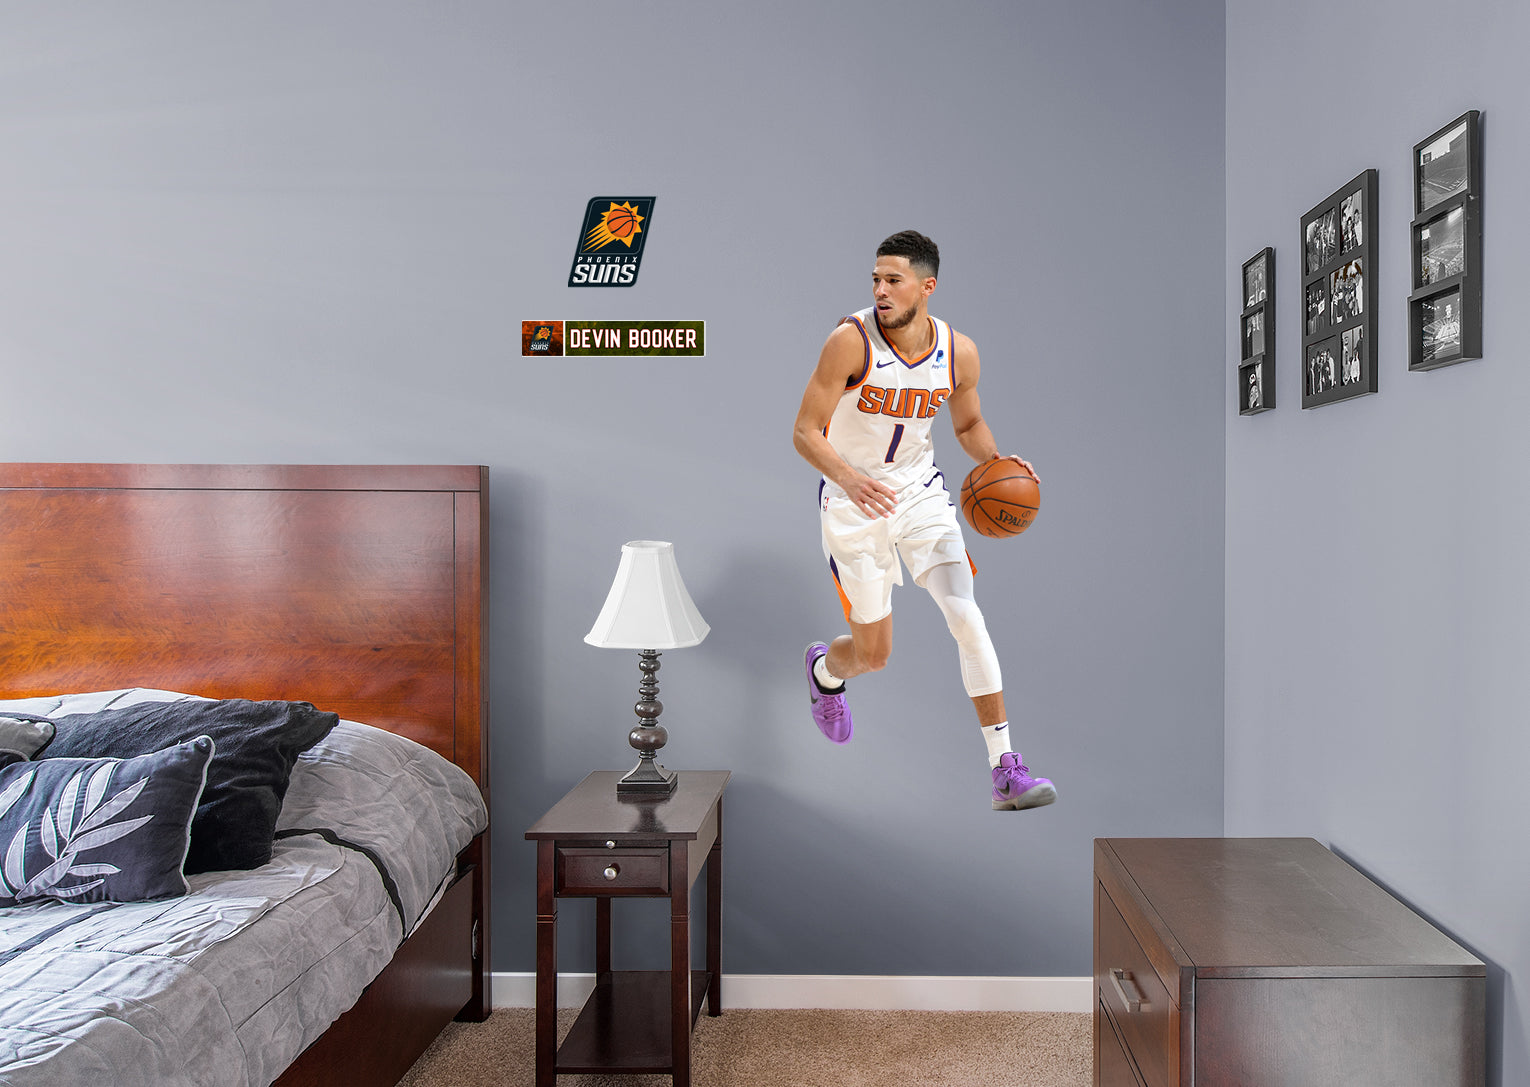 Devin Booker 2021 for Phoenix Suns - Officially Licensed NBA Removable Wall Decal Giant Athlete + 2 Decals (23"W x 51"H) by Fath